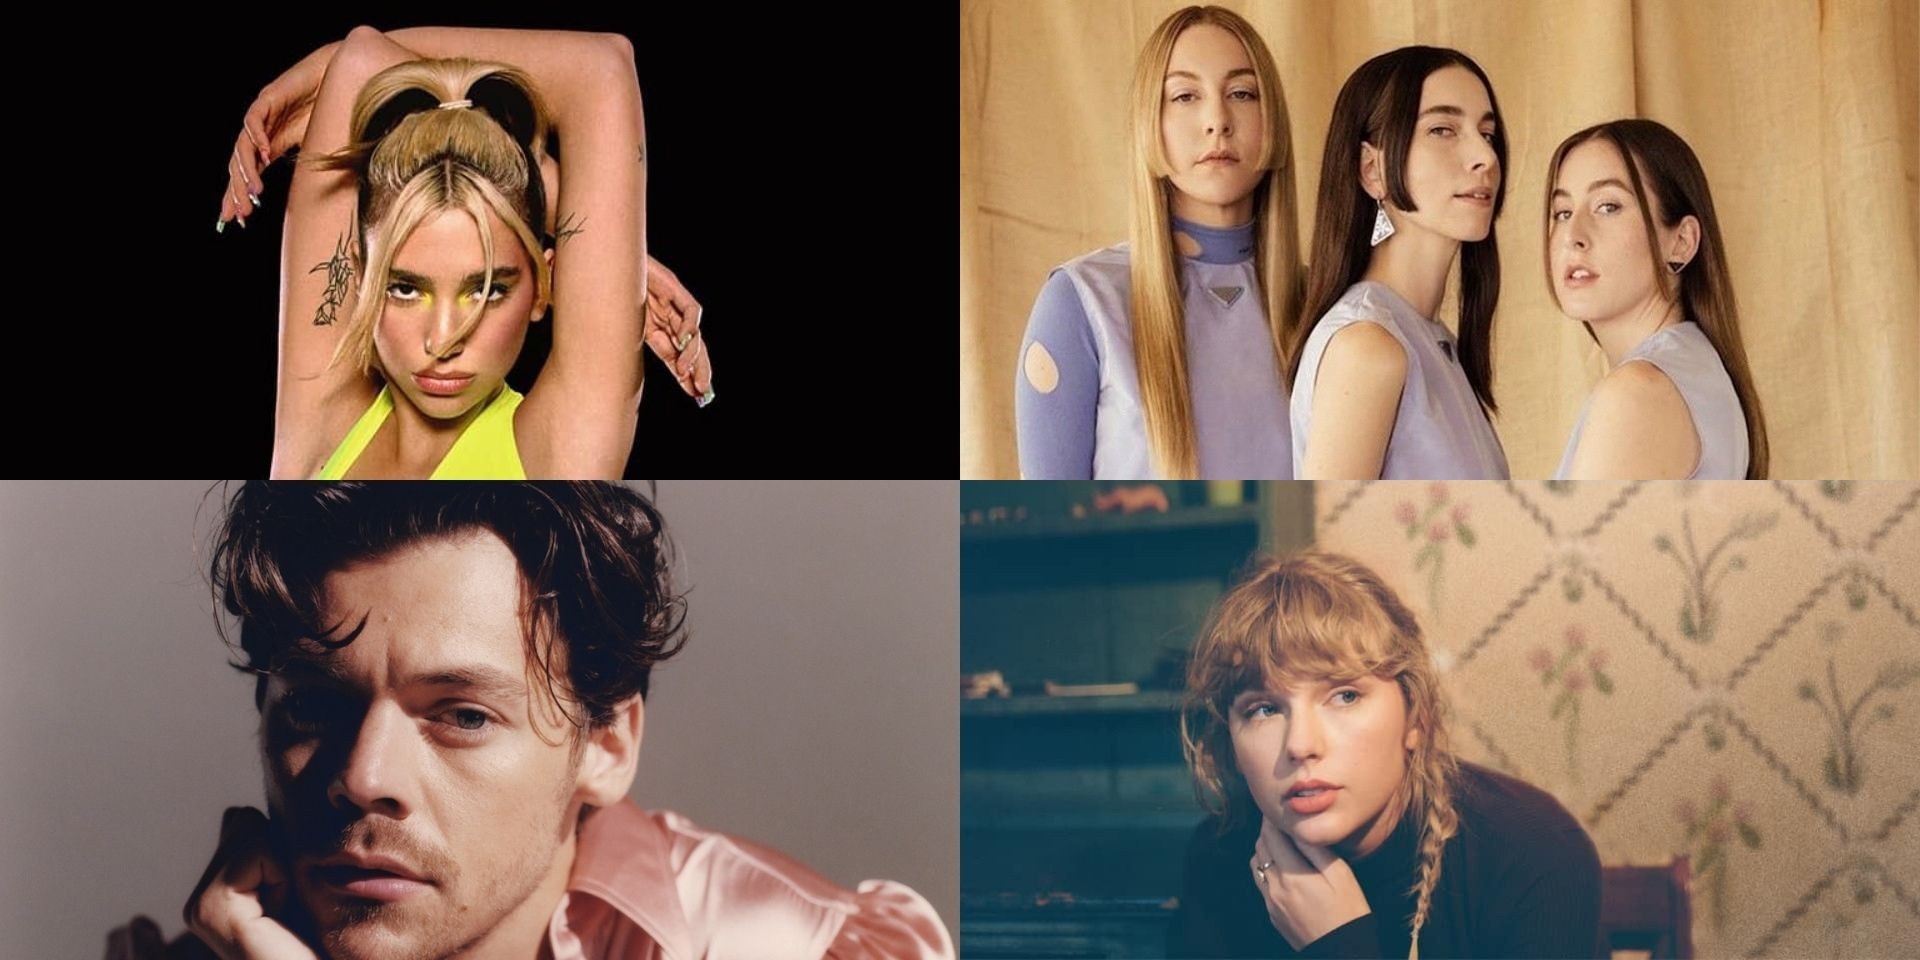 Here are the winners of the 2021 BRIT Awards — Taylor Swift, Dua Lipa, Harry Styles, HAIM, and more